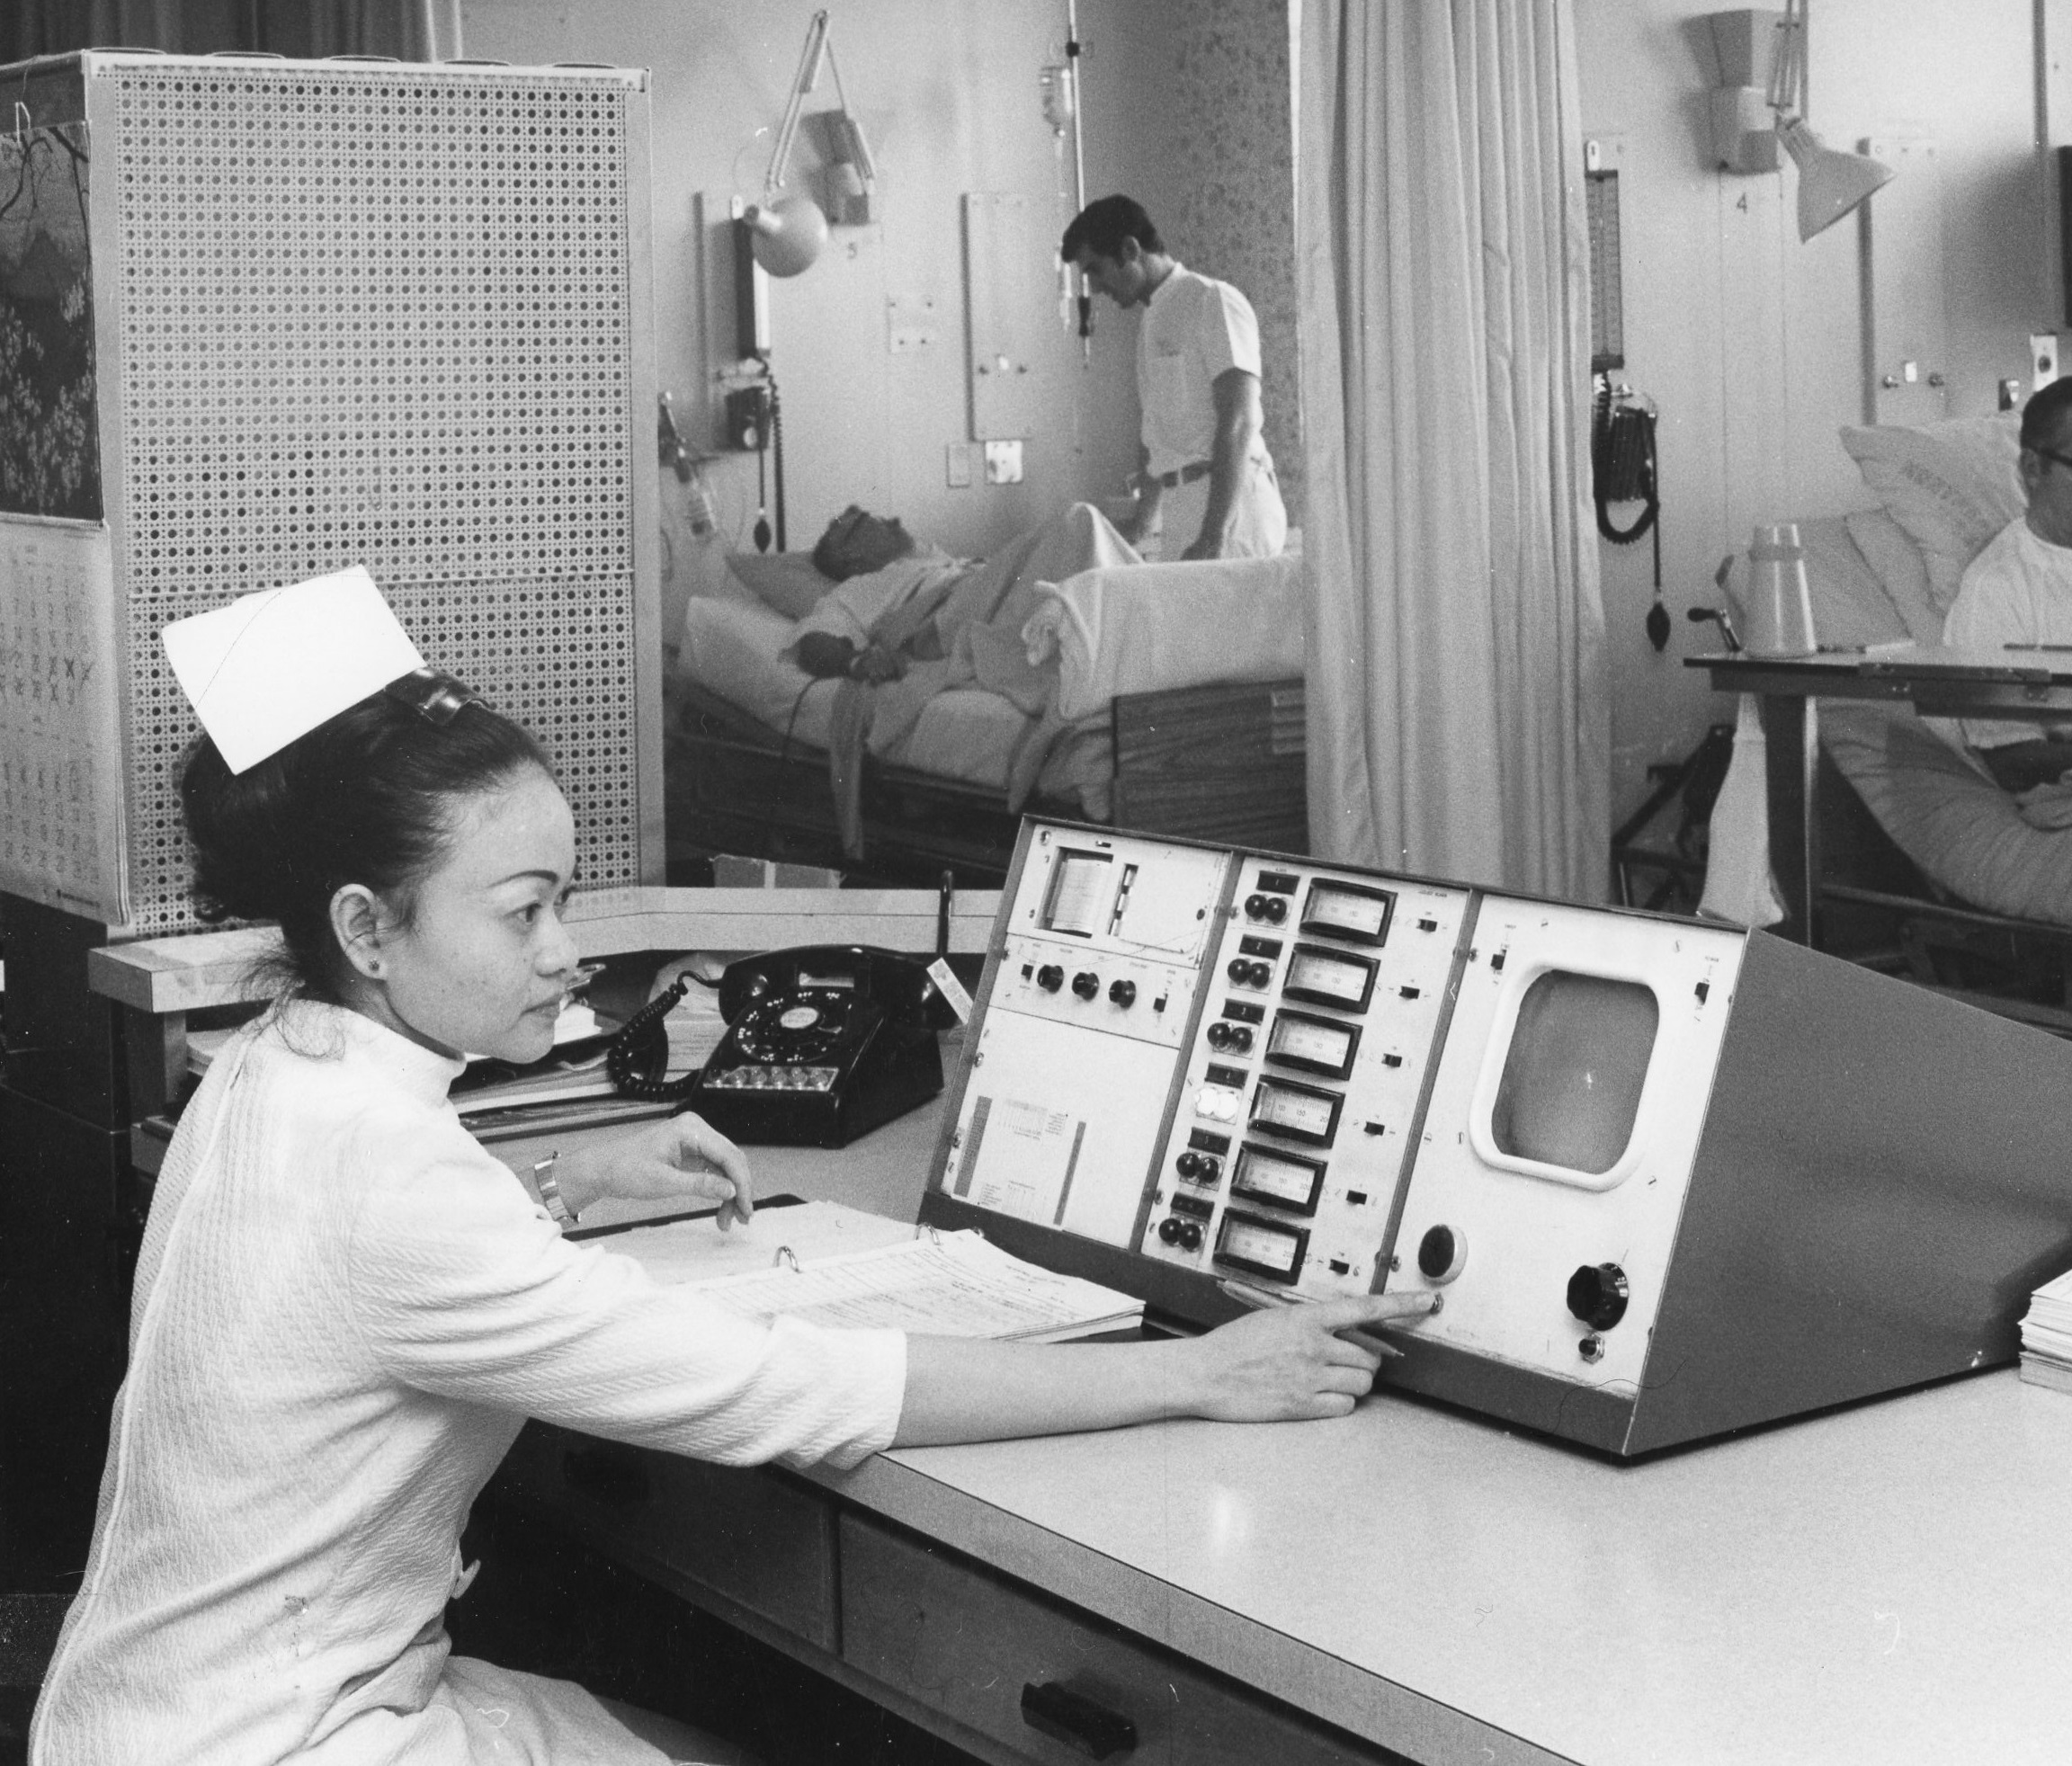 nurse in foreground checks a monitor screen with patients in background